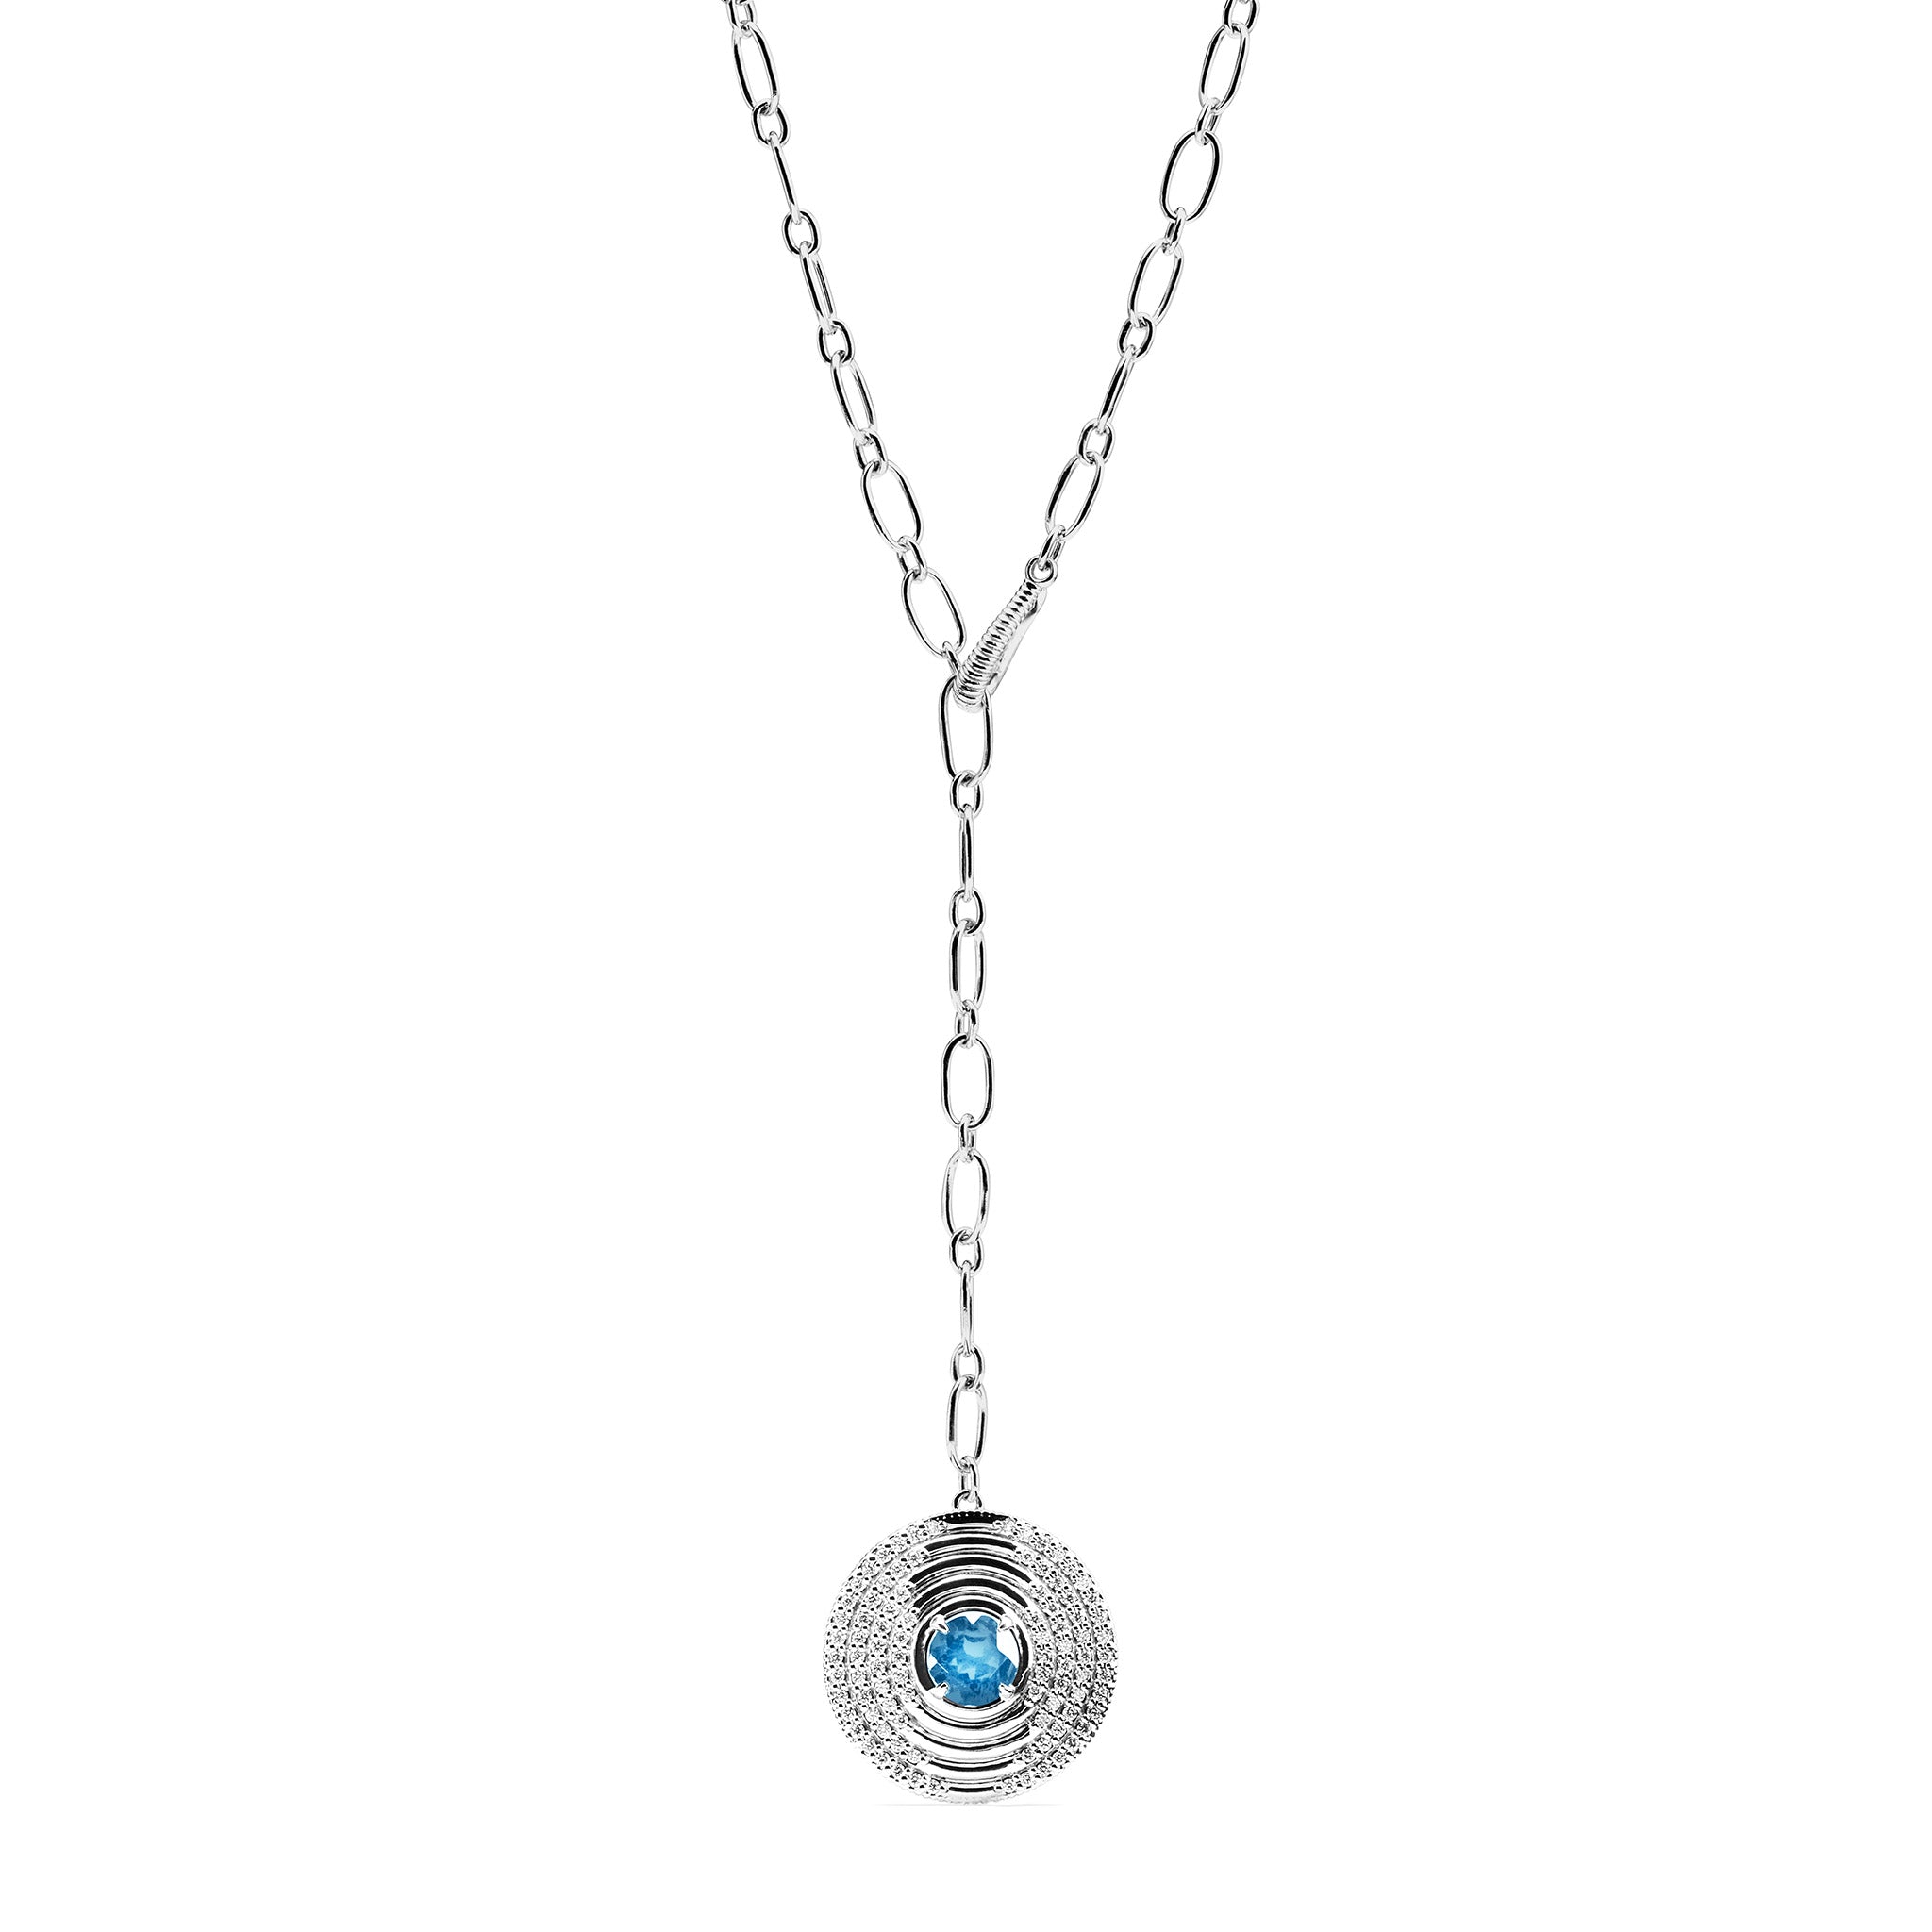 Max Drop Necklace With Swiss Blue Topaz And Diamonds